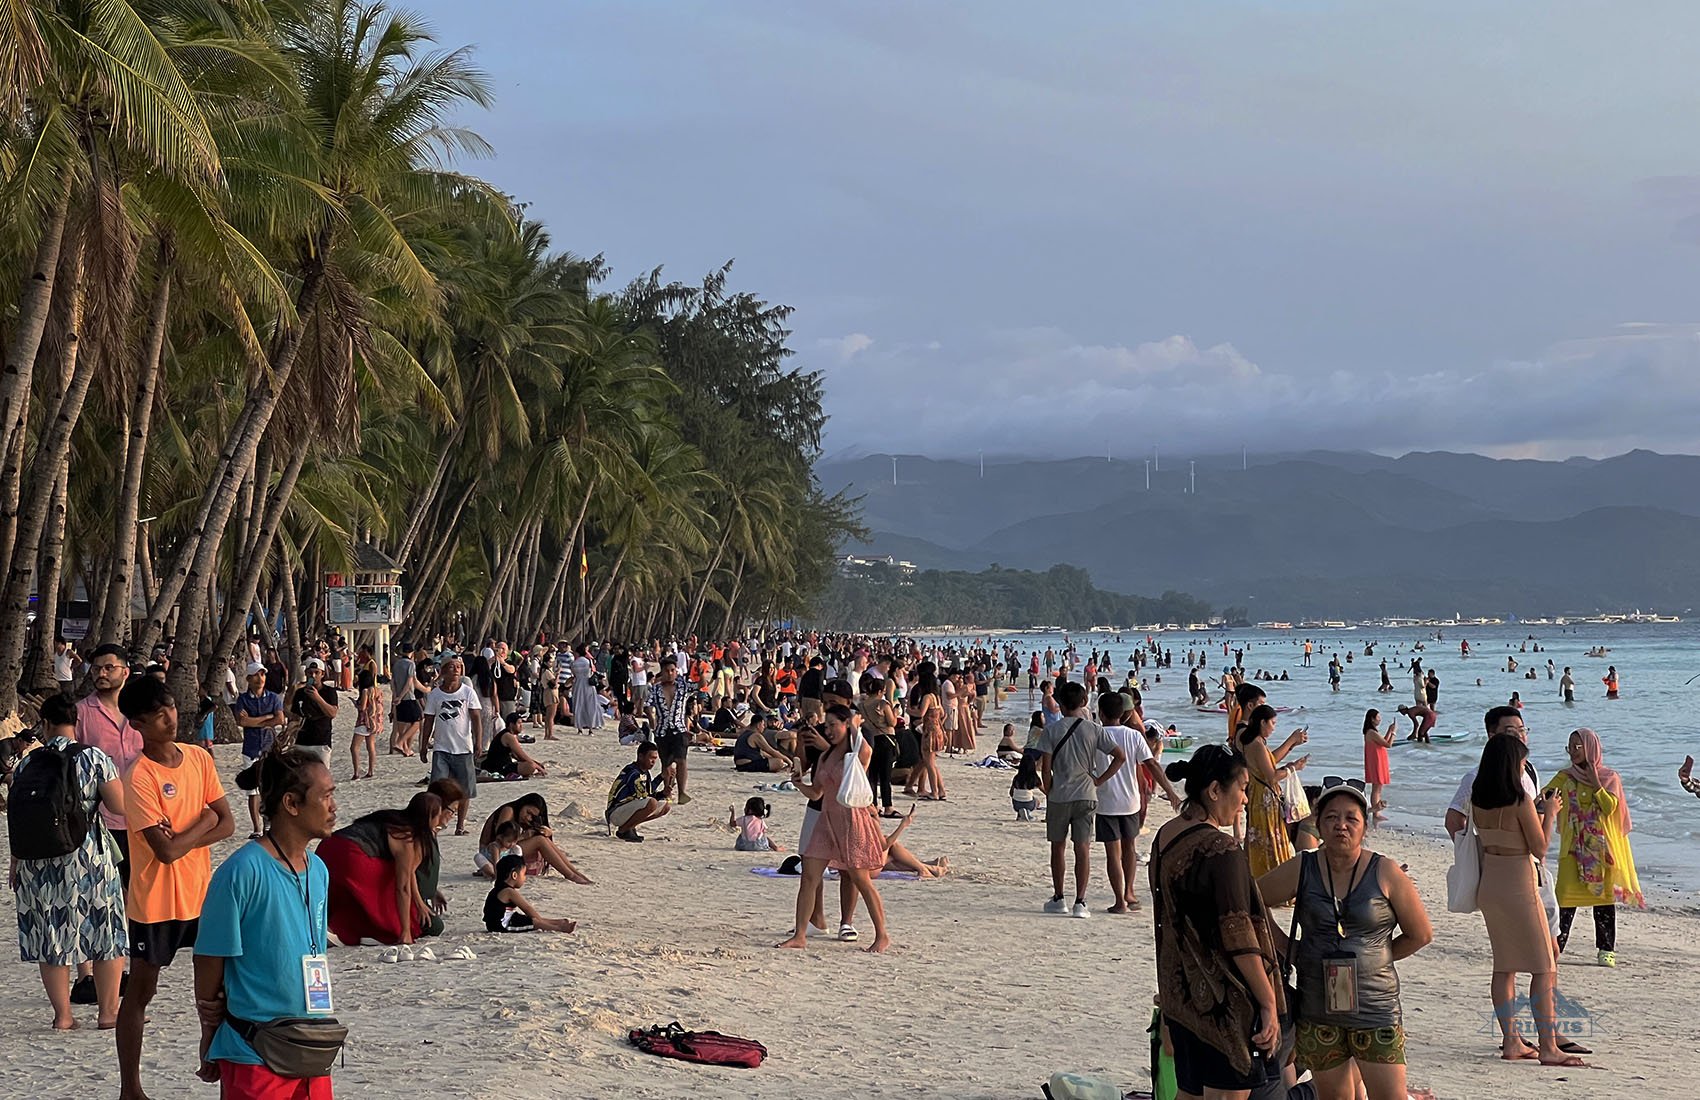 People meeting sunset in Boracay